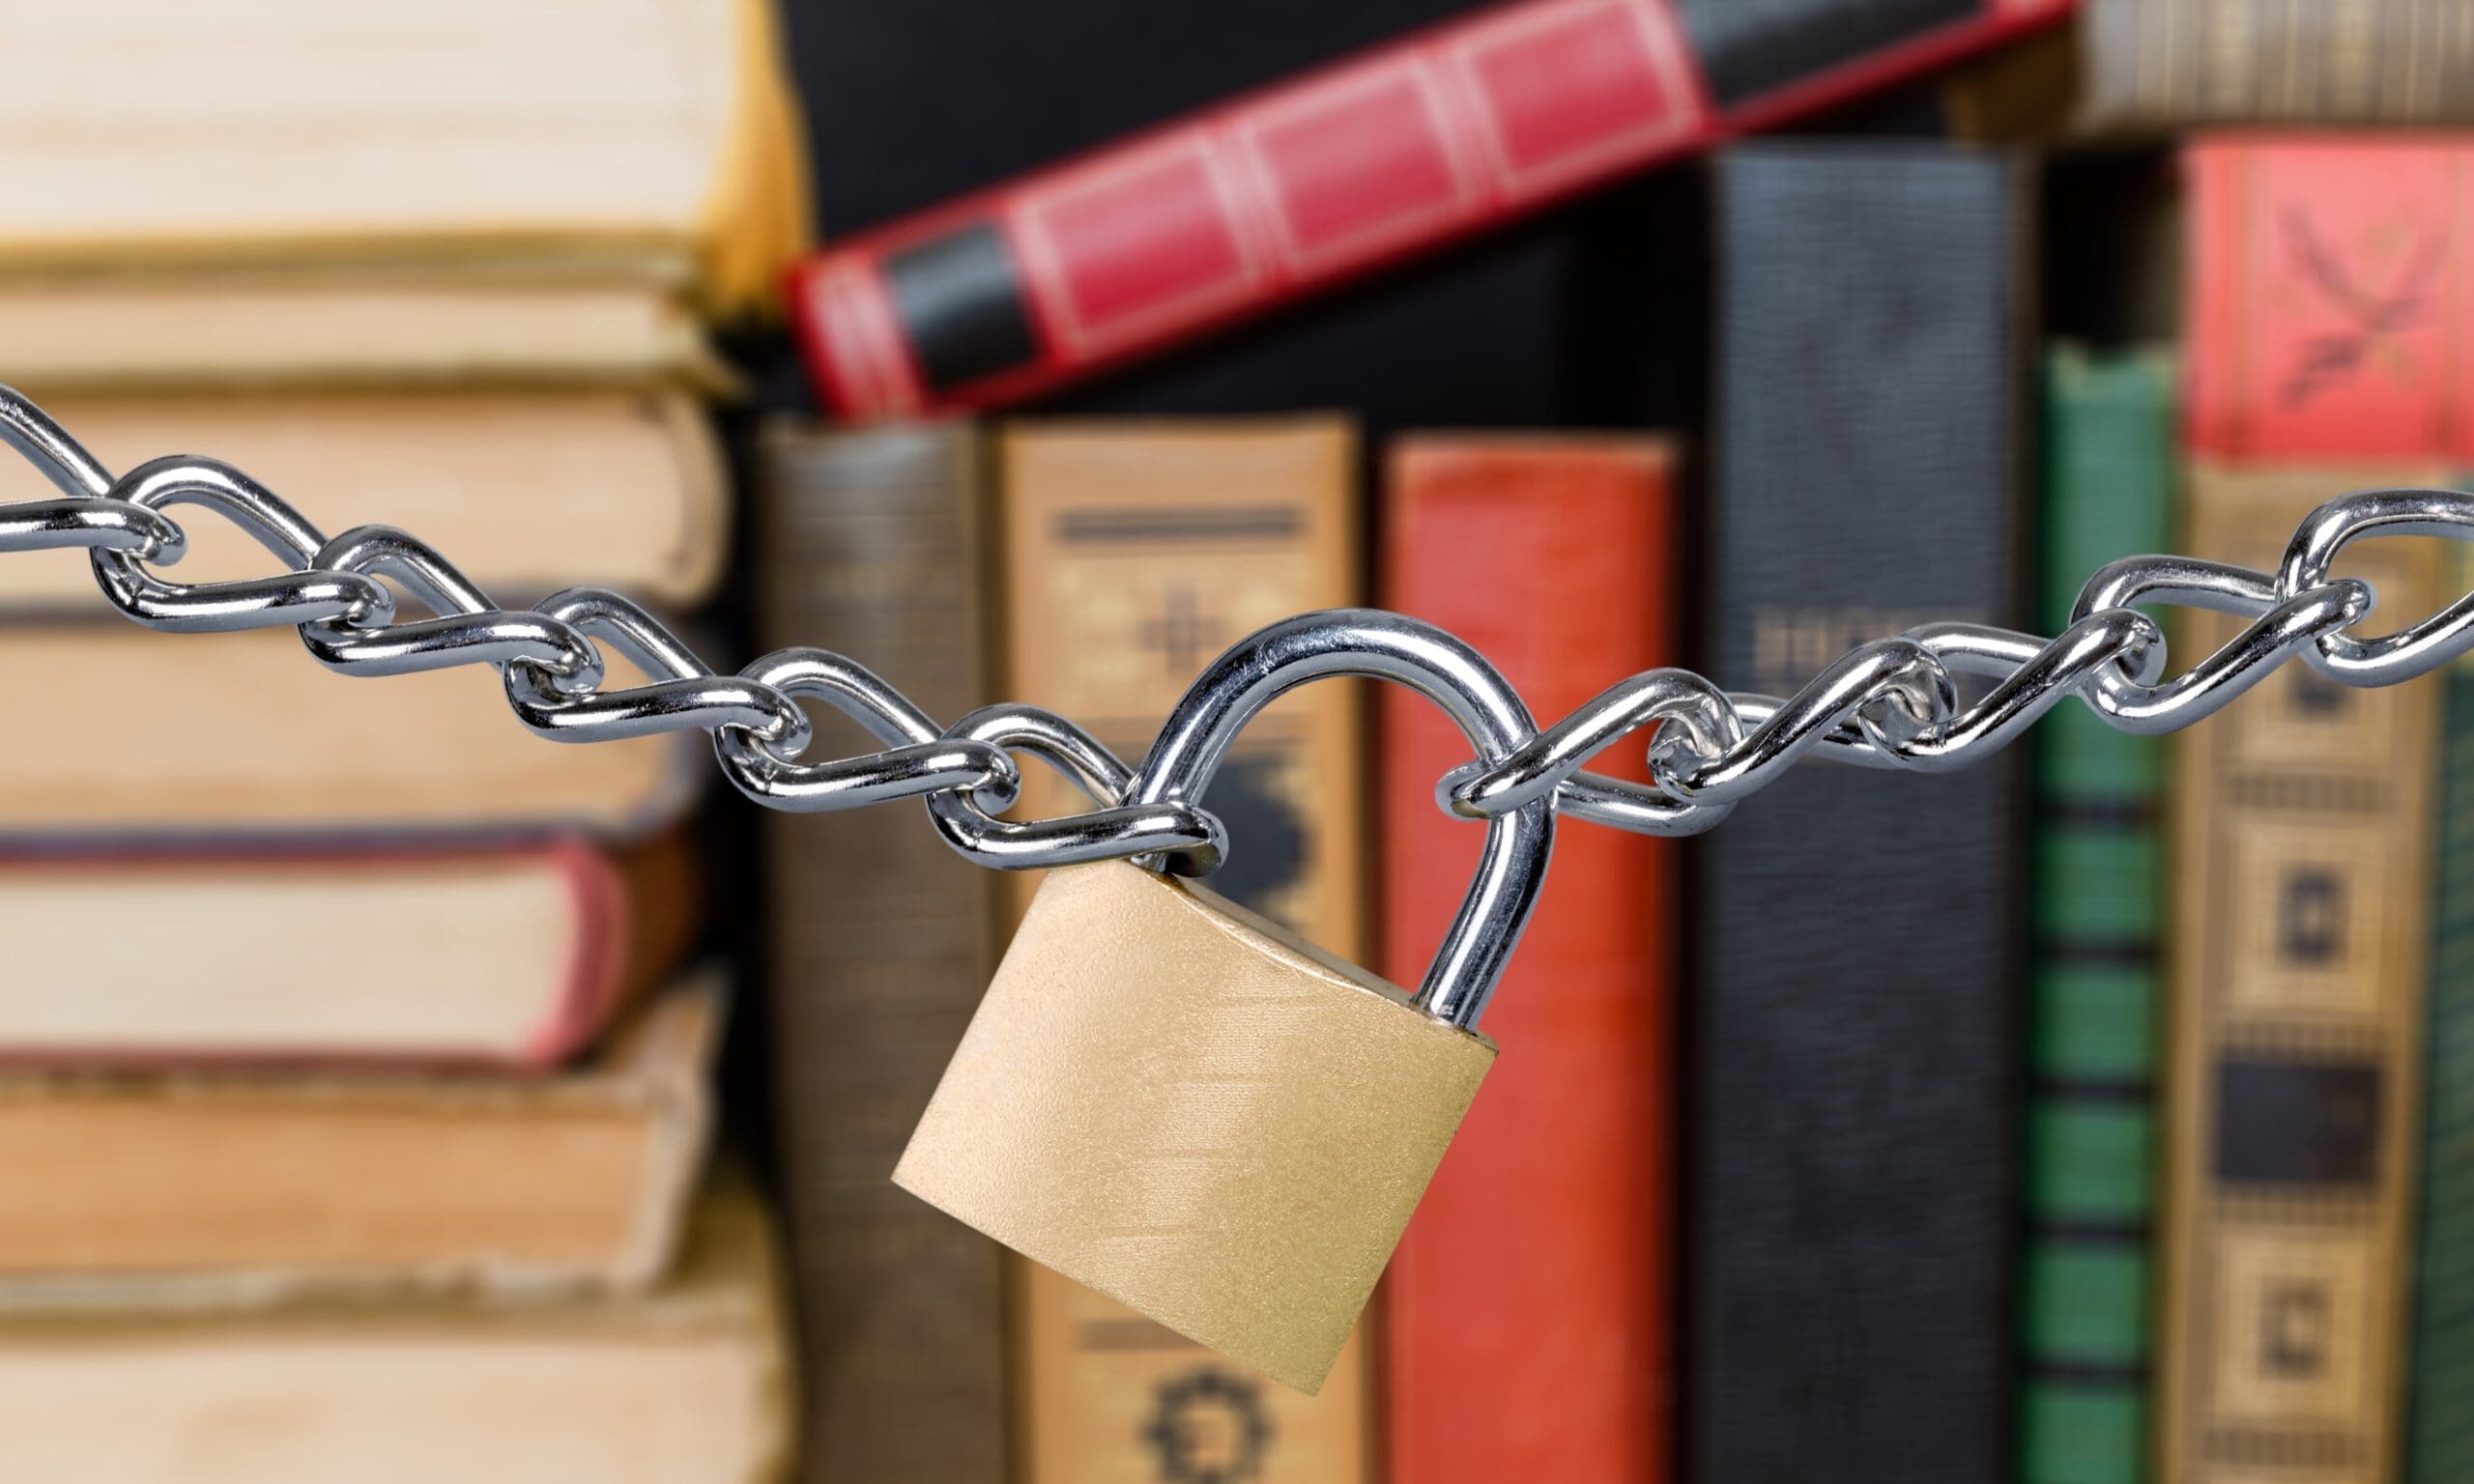 Image of books on shelf with a lock and chain keeping them in place.